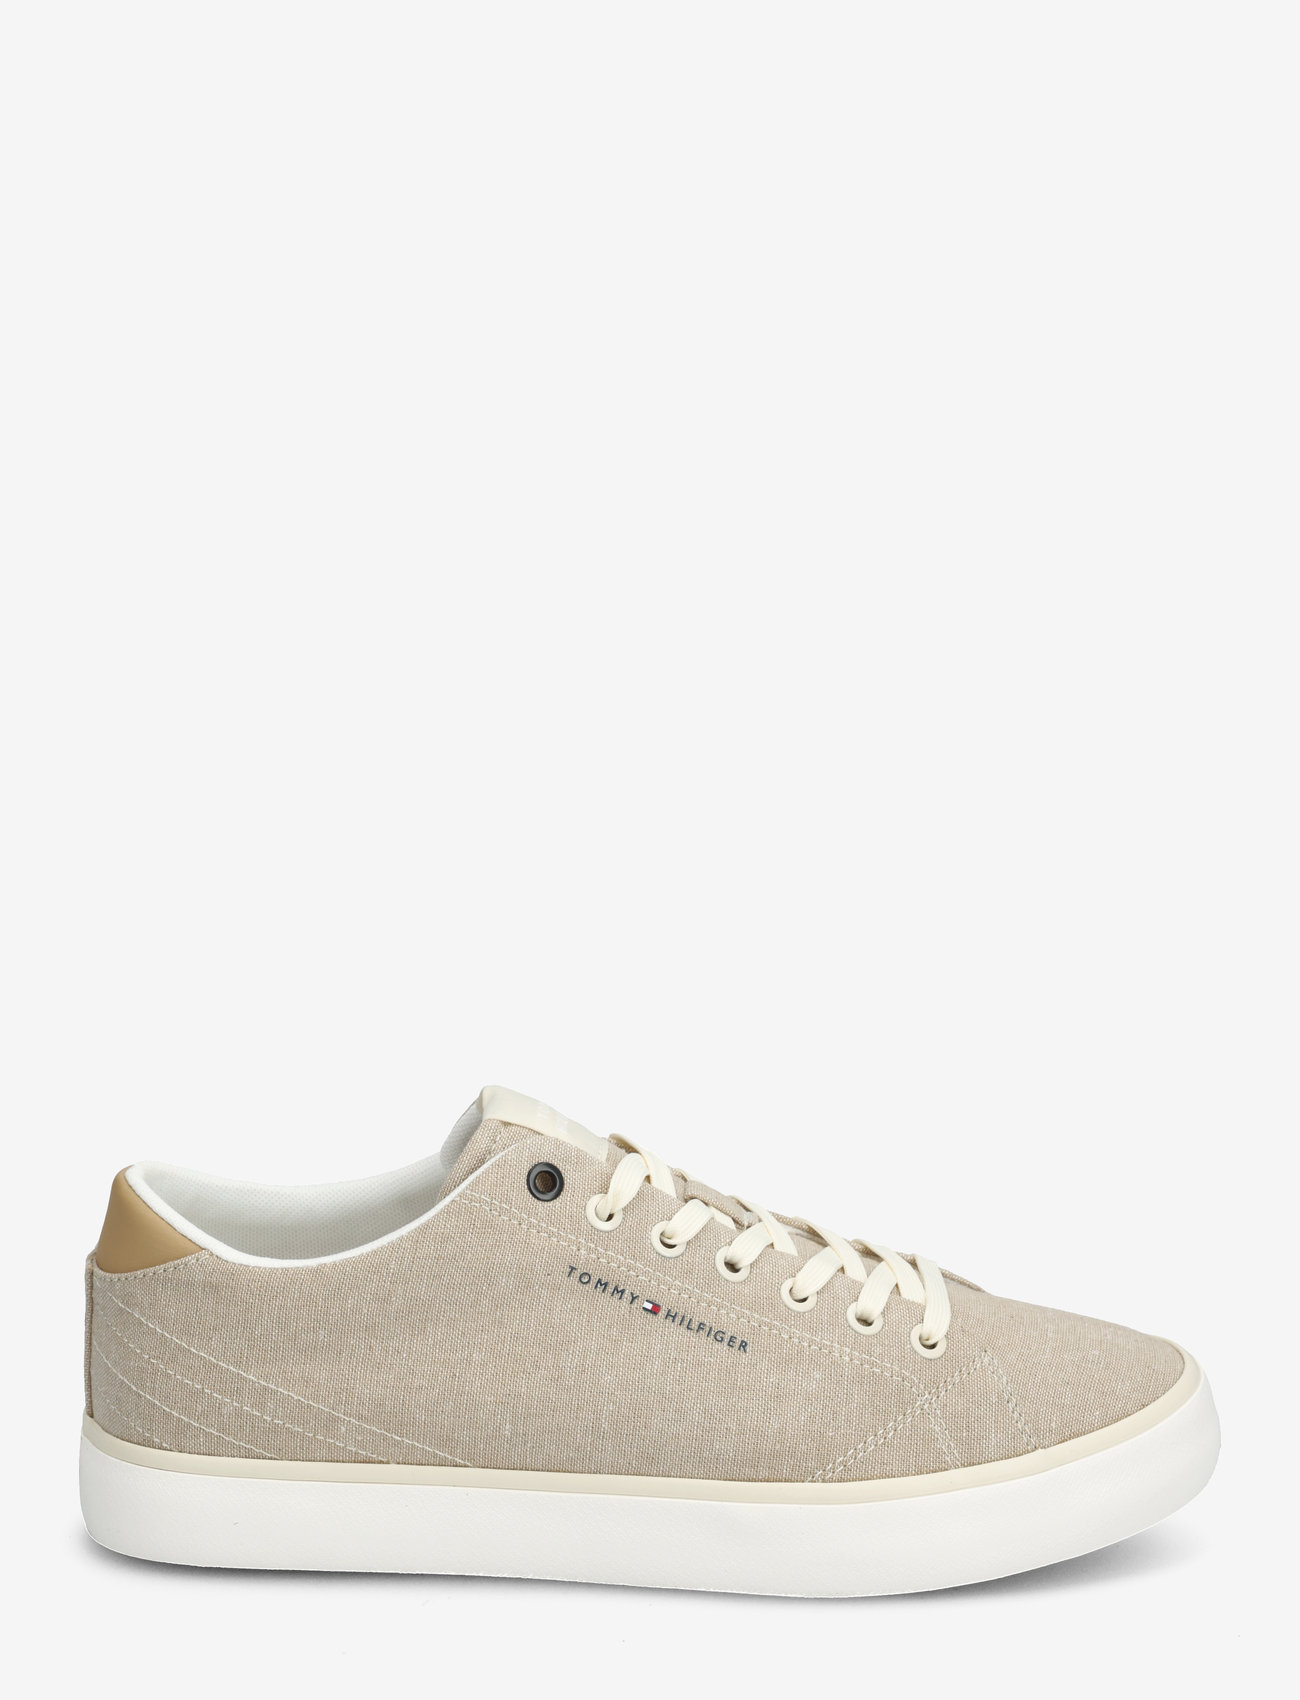 Tommy Hilfiger - TH HI VULC LOW CHAMBRAY - low tops - calico - 1